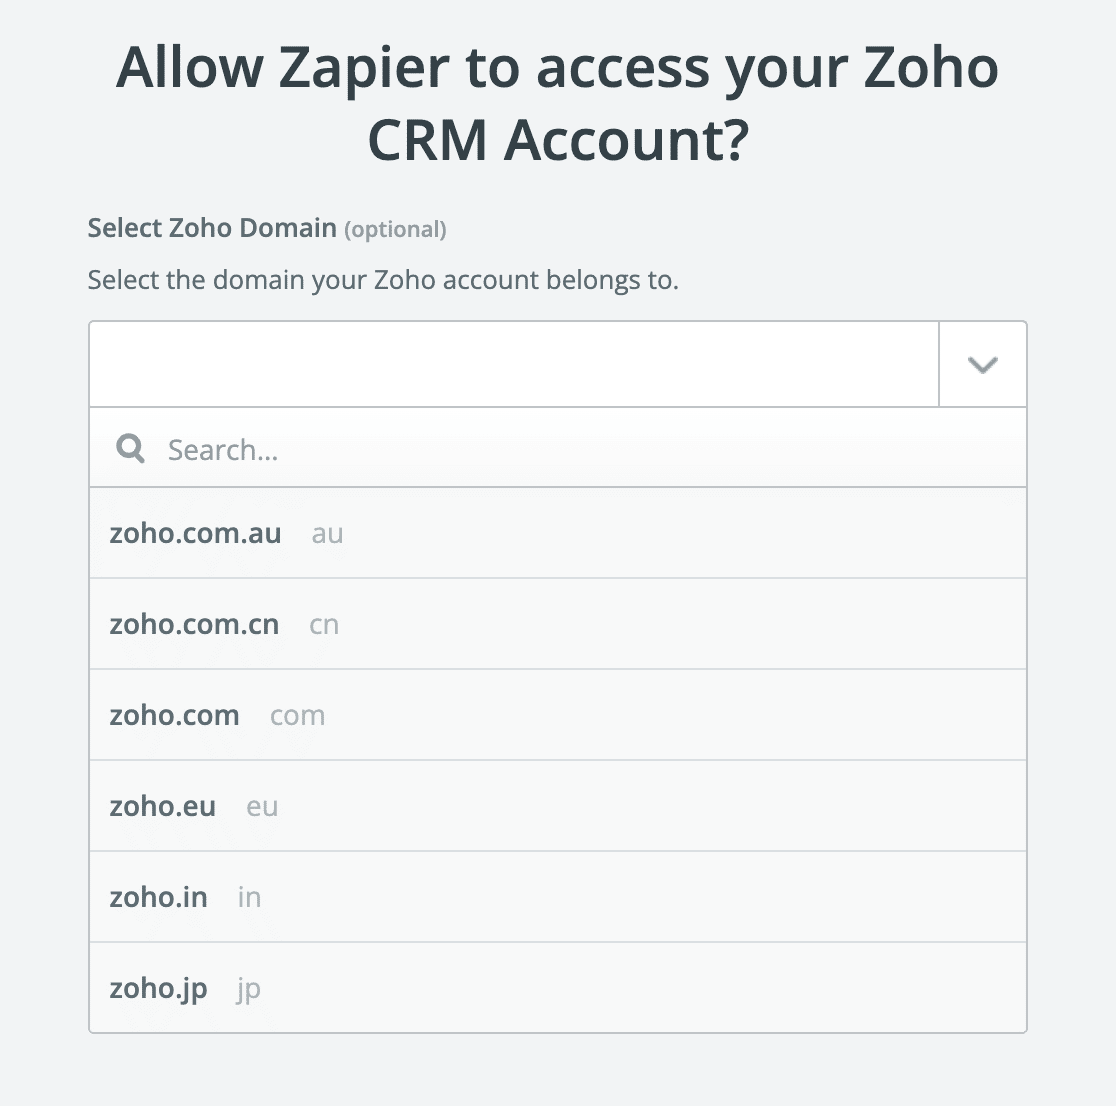 Selecting your Zoho domain